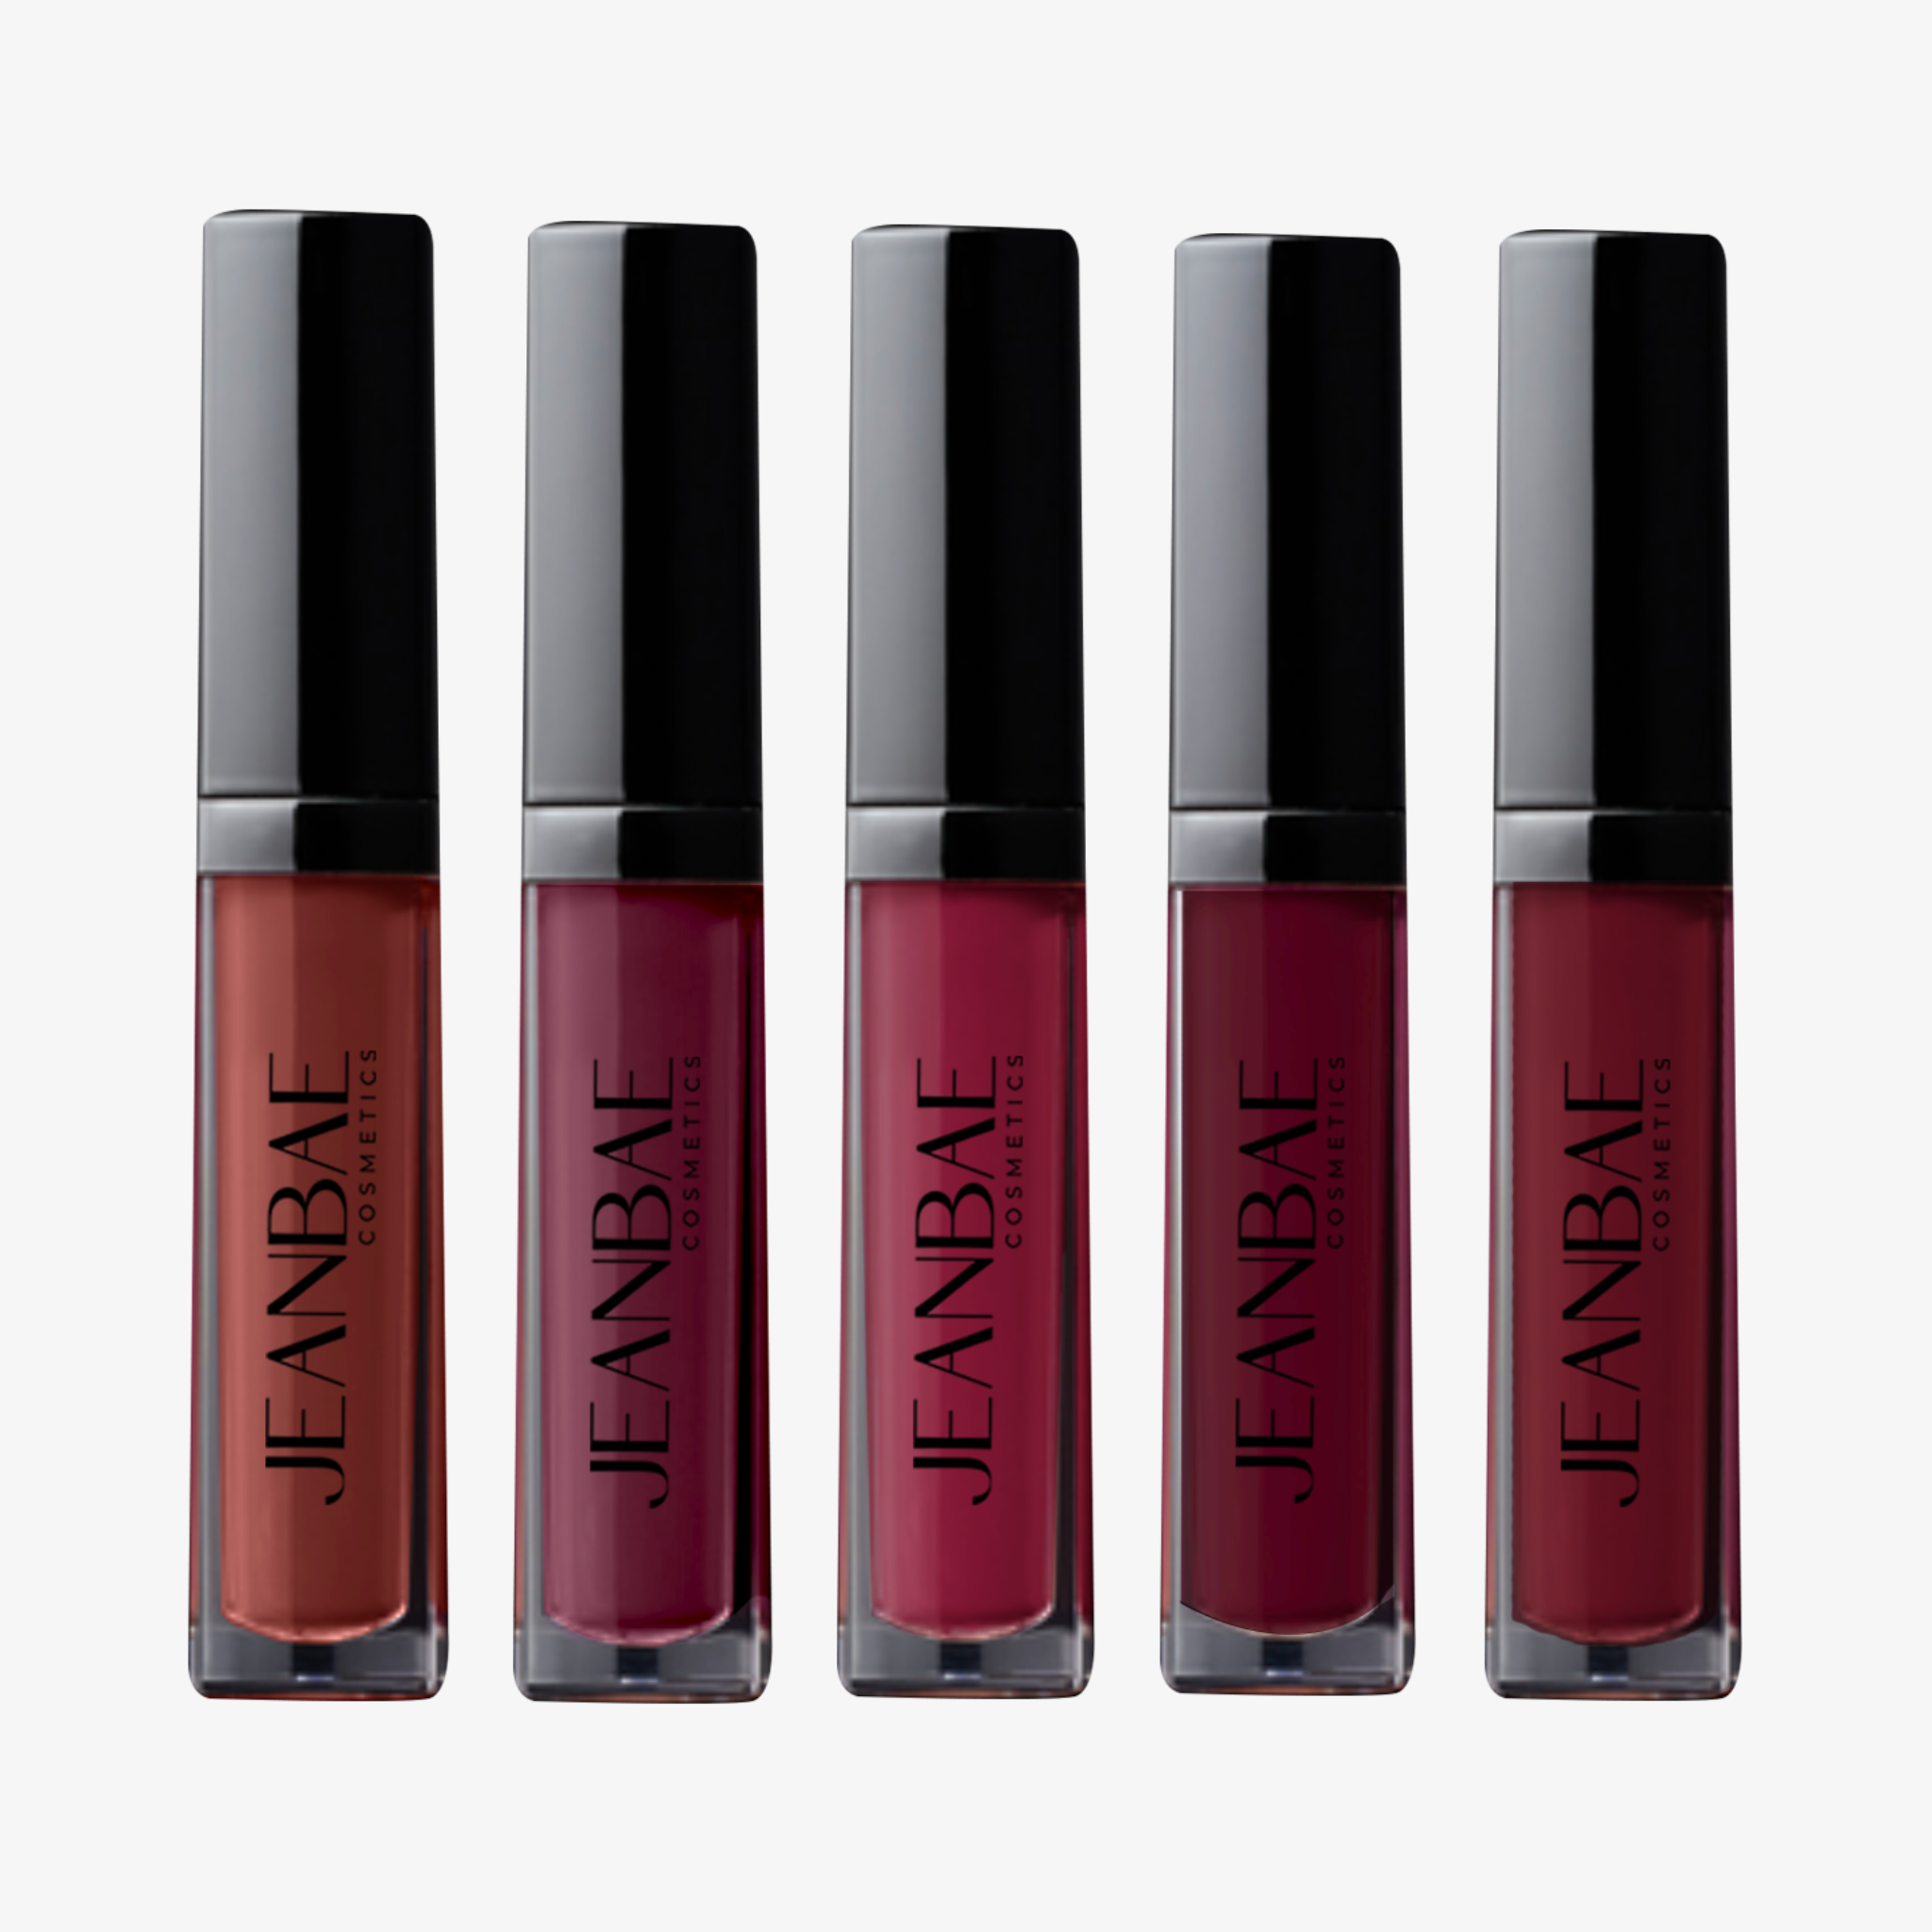 This is a liquid lipstick that achieves strong coverage in just one stroke with a long-lasting formula for up to 12 hours.  THIS PRODUCT IS Cruelty-Free, Hypoallergenic, Non-Comedogenic, Halal Certified, and EU Compliant. Free of Parabens and Fragrances.